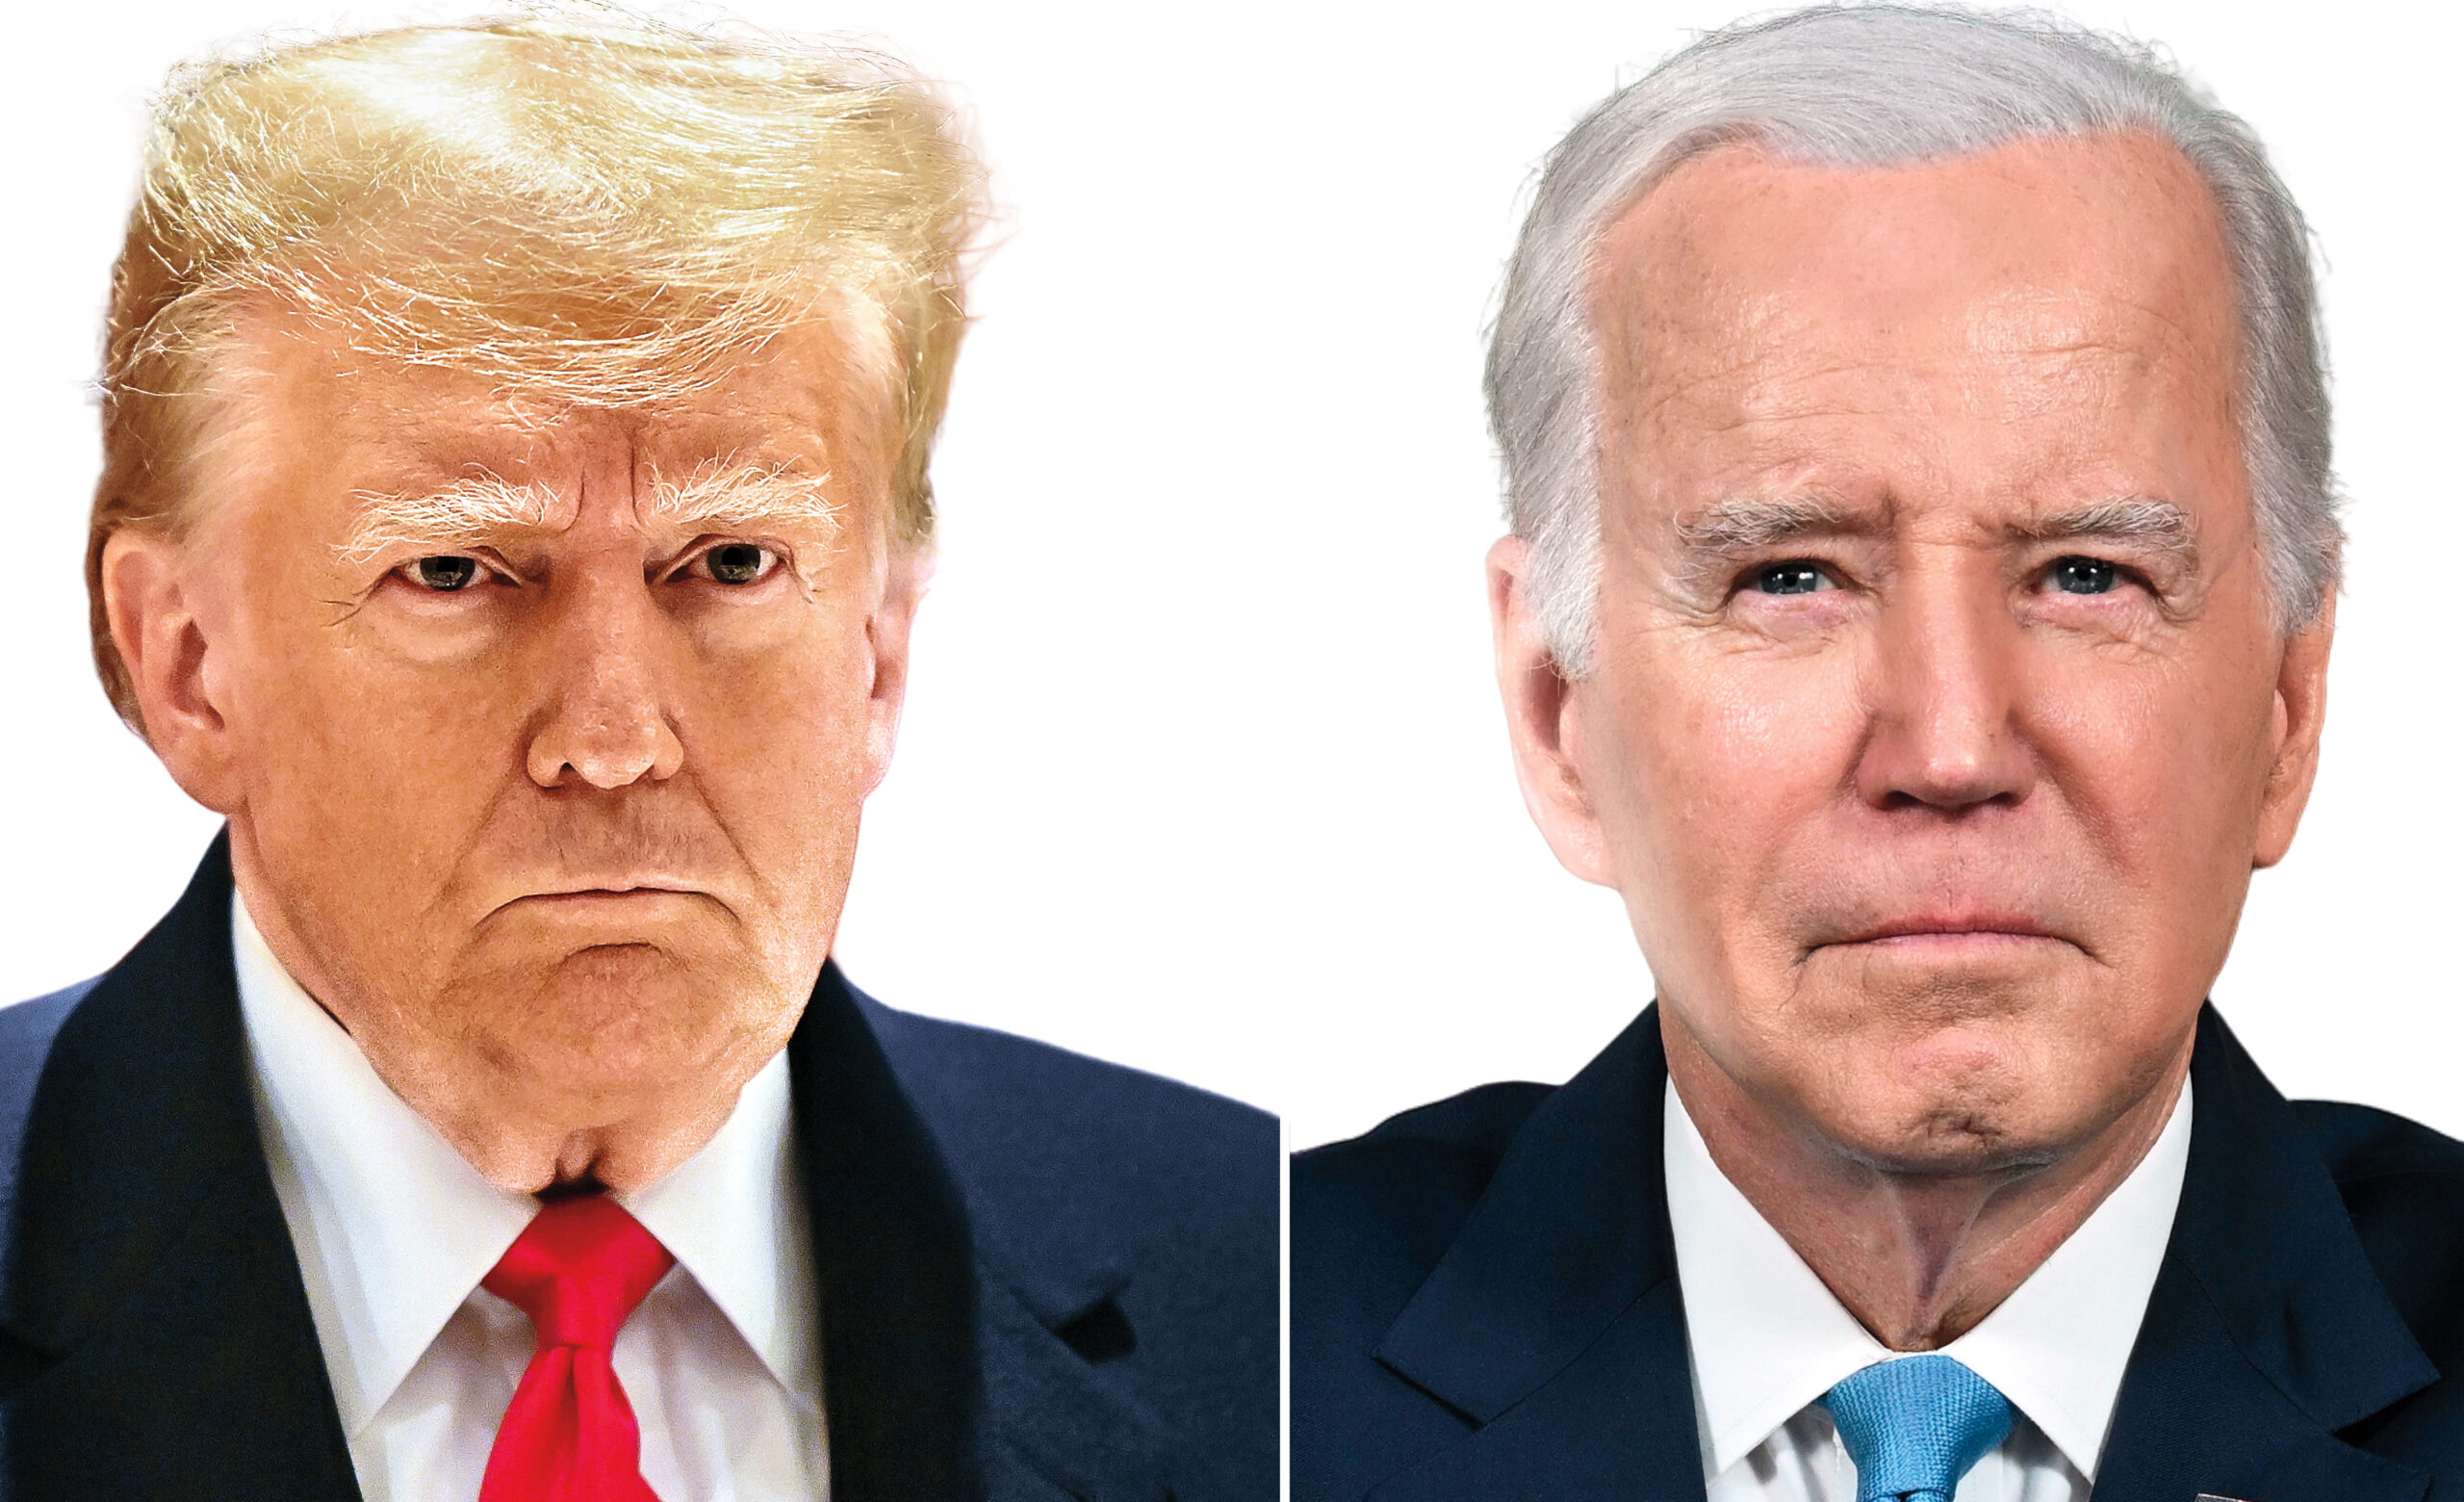 Timeline: U.S.-Latin America Relations Under Trump and Biden. AQ highlights the major moments in hemispheric relations under the two presidents, from USMCA to Biden’s border action.